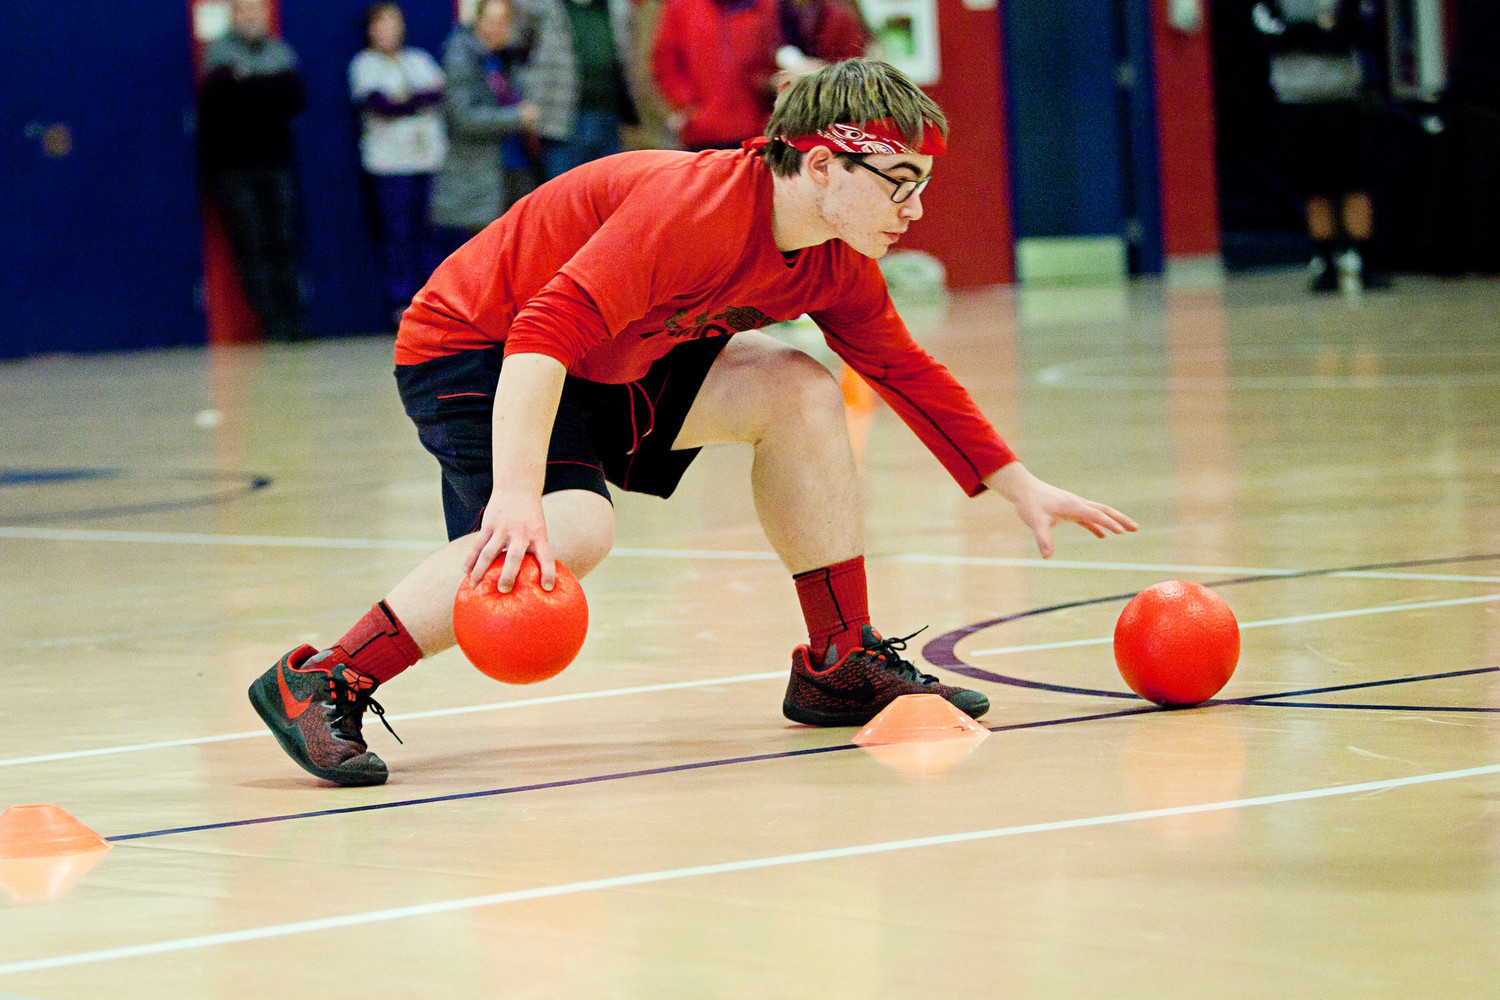 Sophomore Jacob Bloom, a member of the team Phillip Phlingers, gathers balls at the center line.